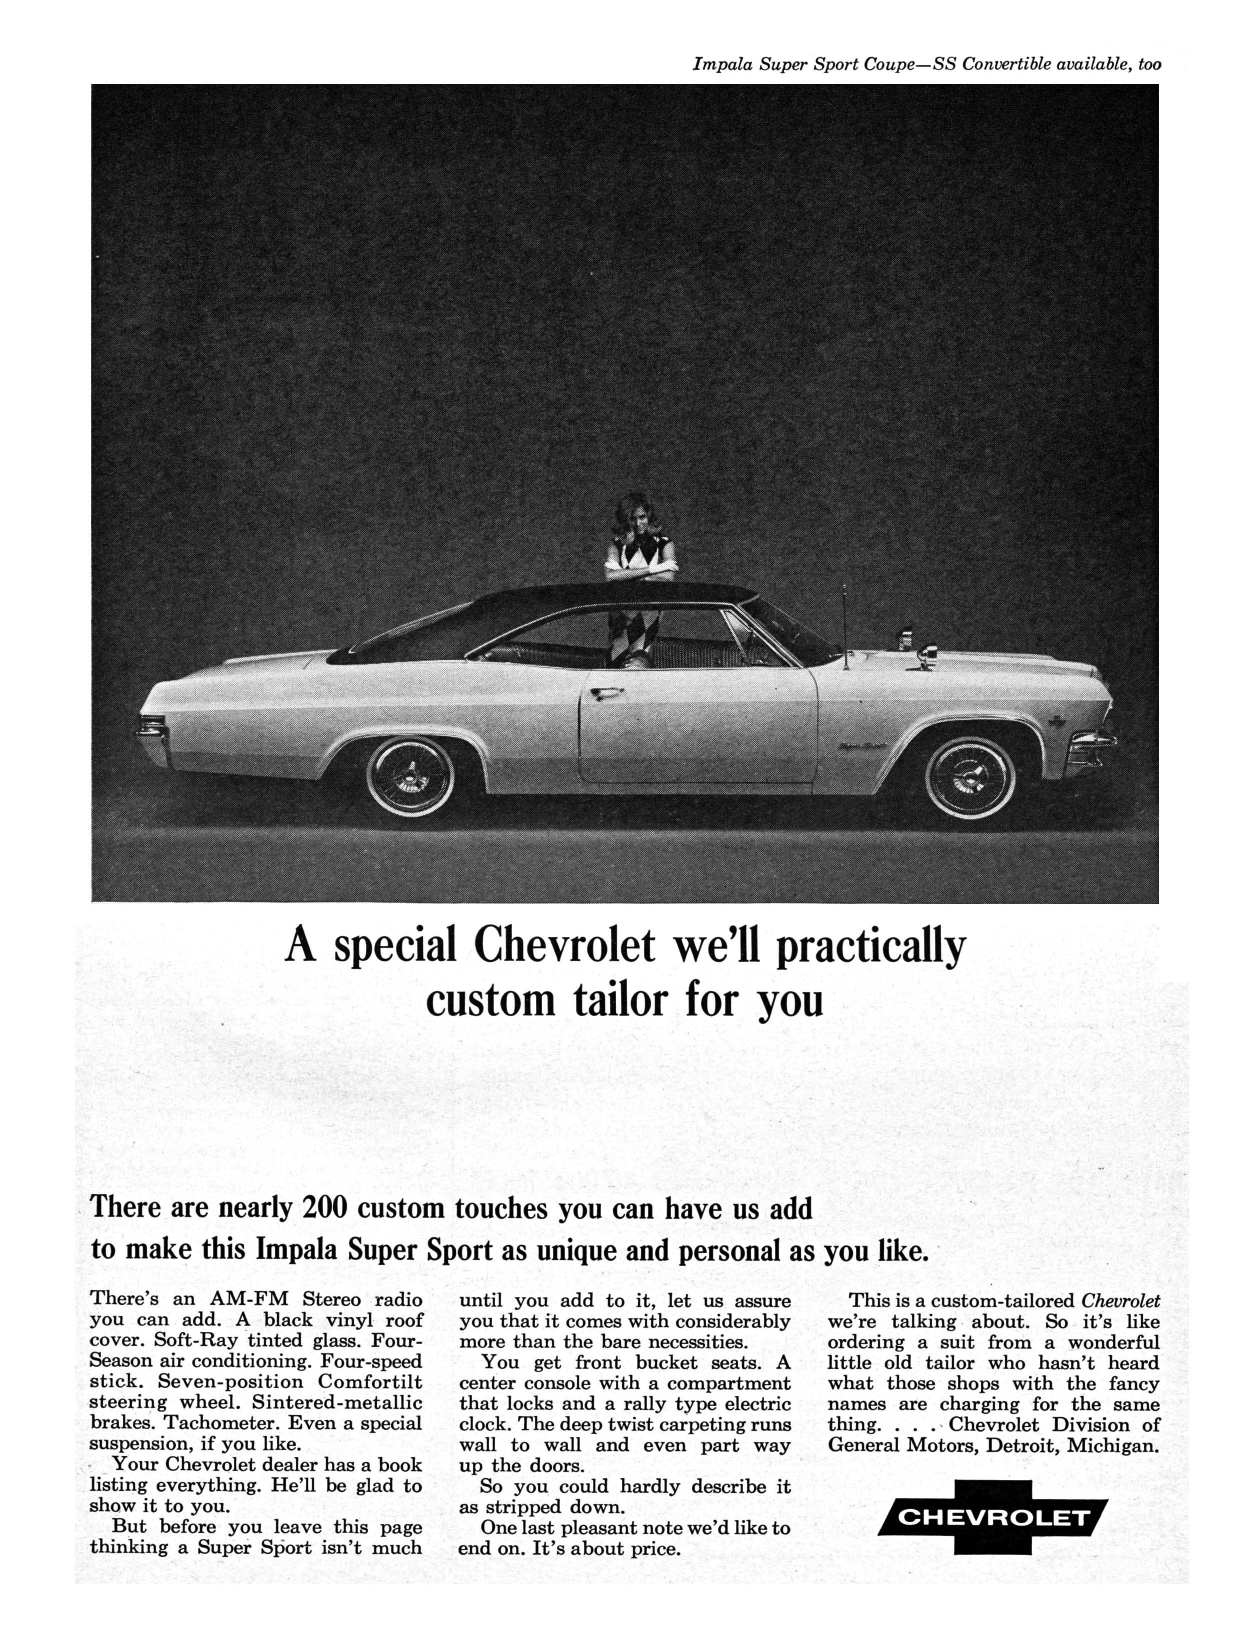 1965 Chevrolet Ad, Impala Super Sport "... We'll practically custom tailor for you."